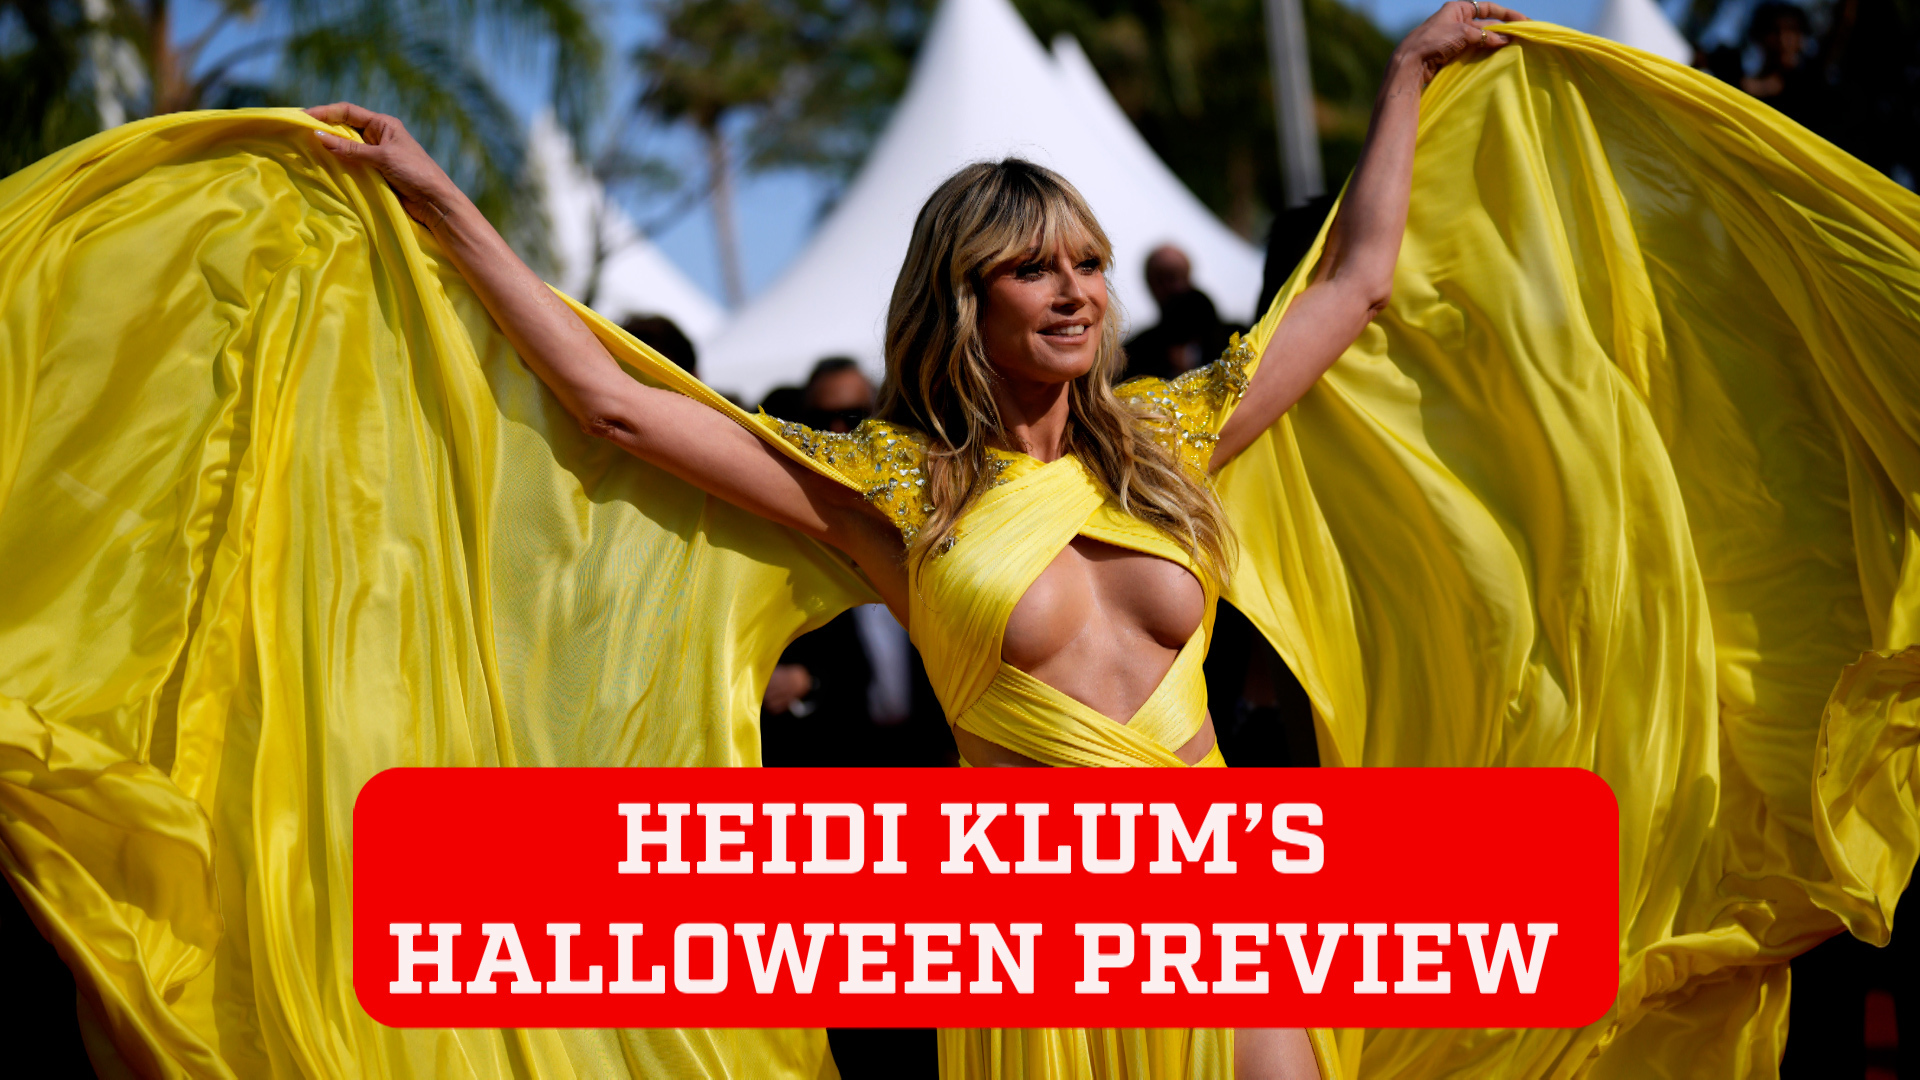 Heidi Klum gives fans clues about her Halloween costume with spooky Instagram preview